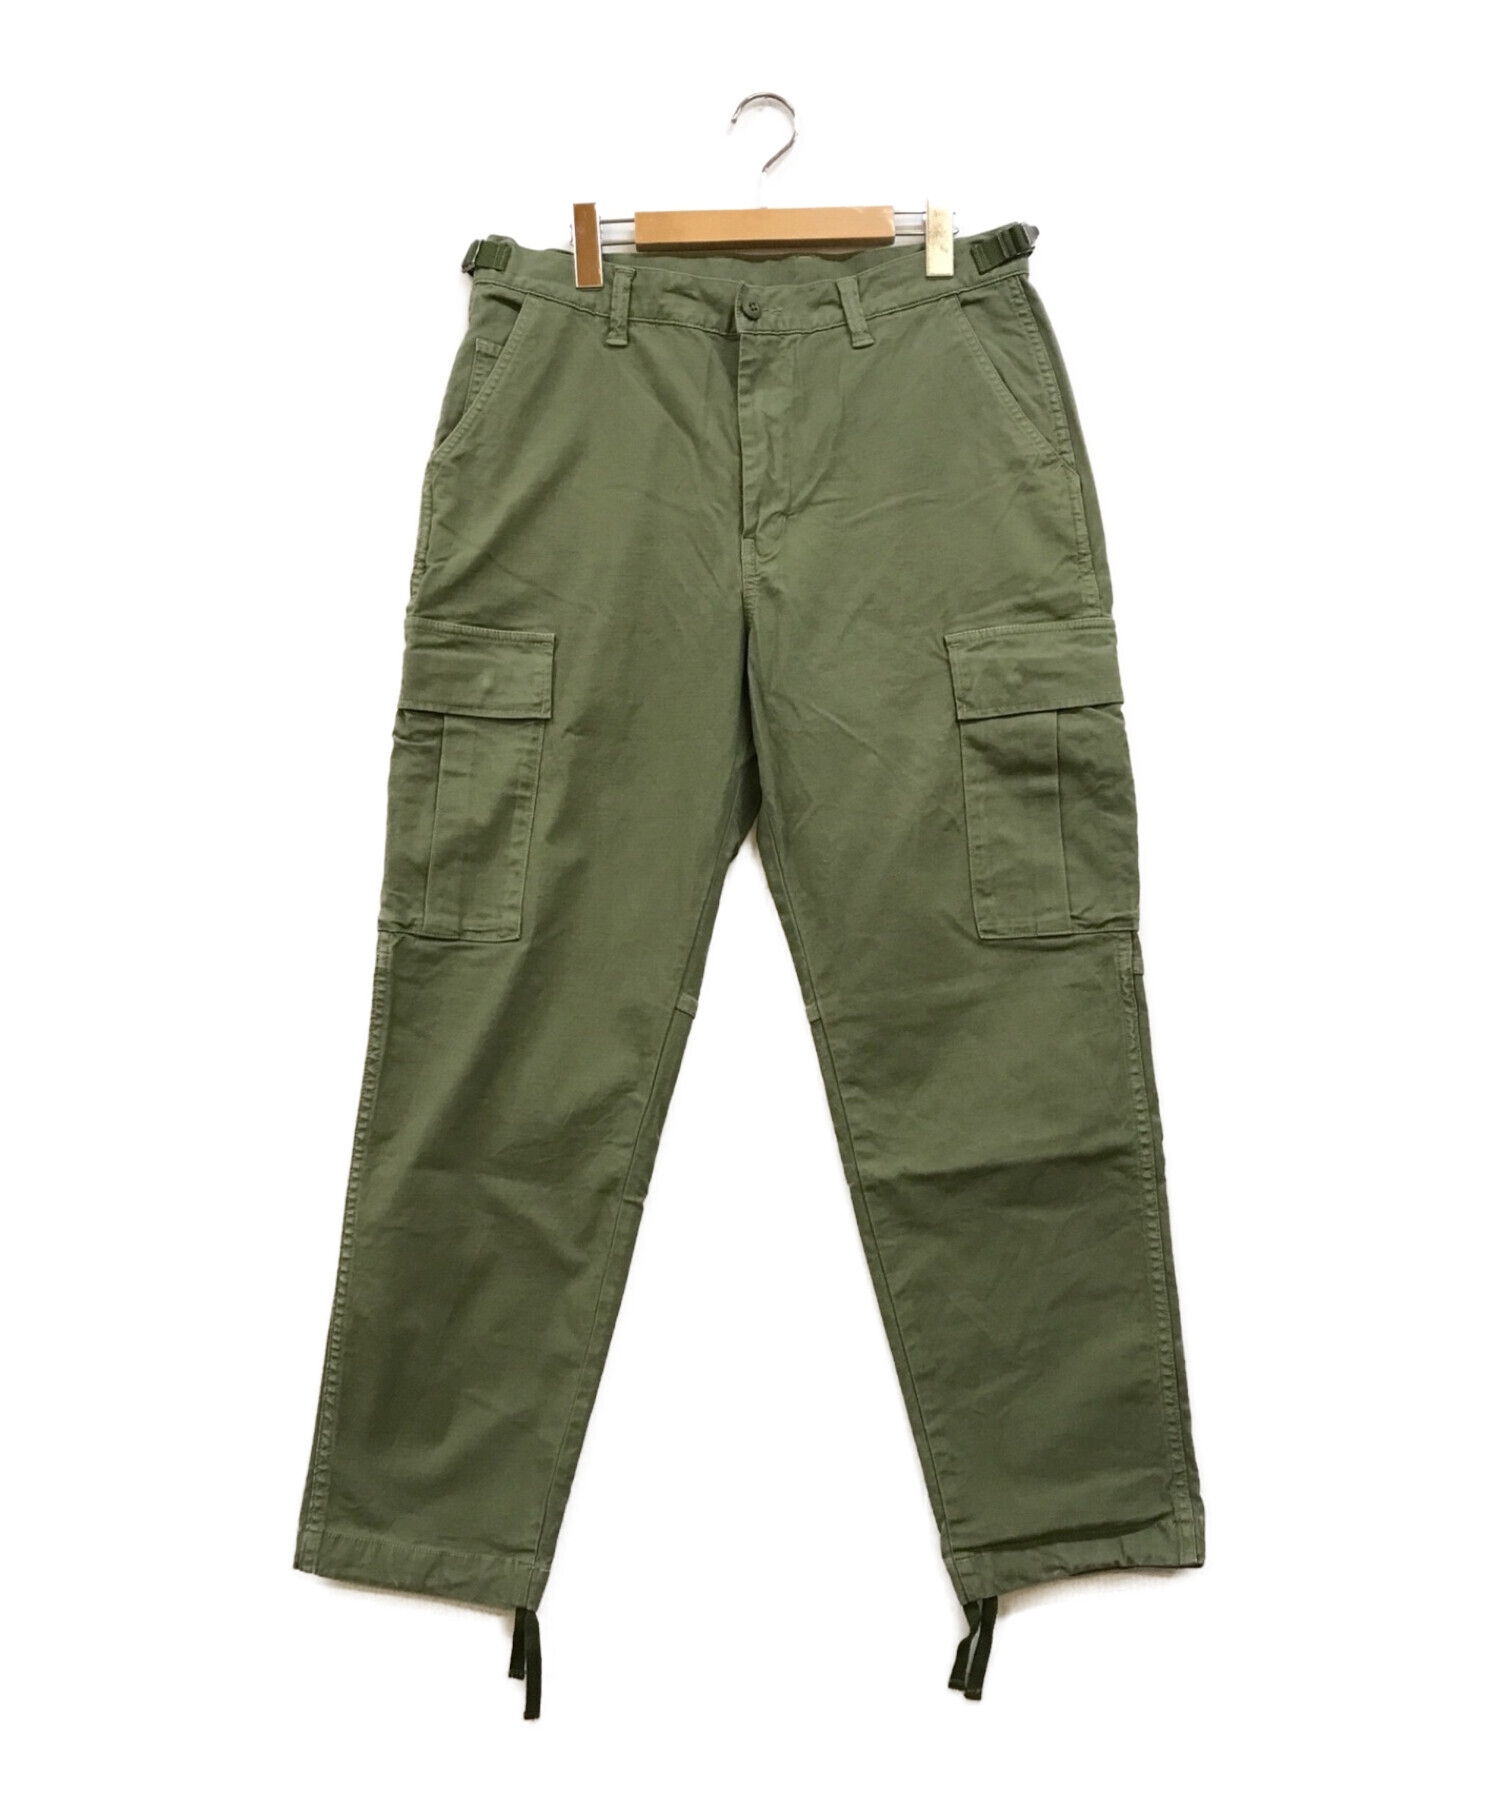 UNDEFEATED CAMO CARGO SHORT SIZE 34 アンディフィーテッド カモ柄